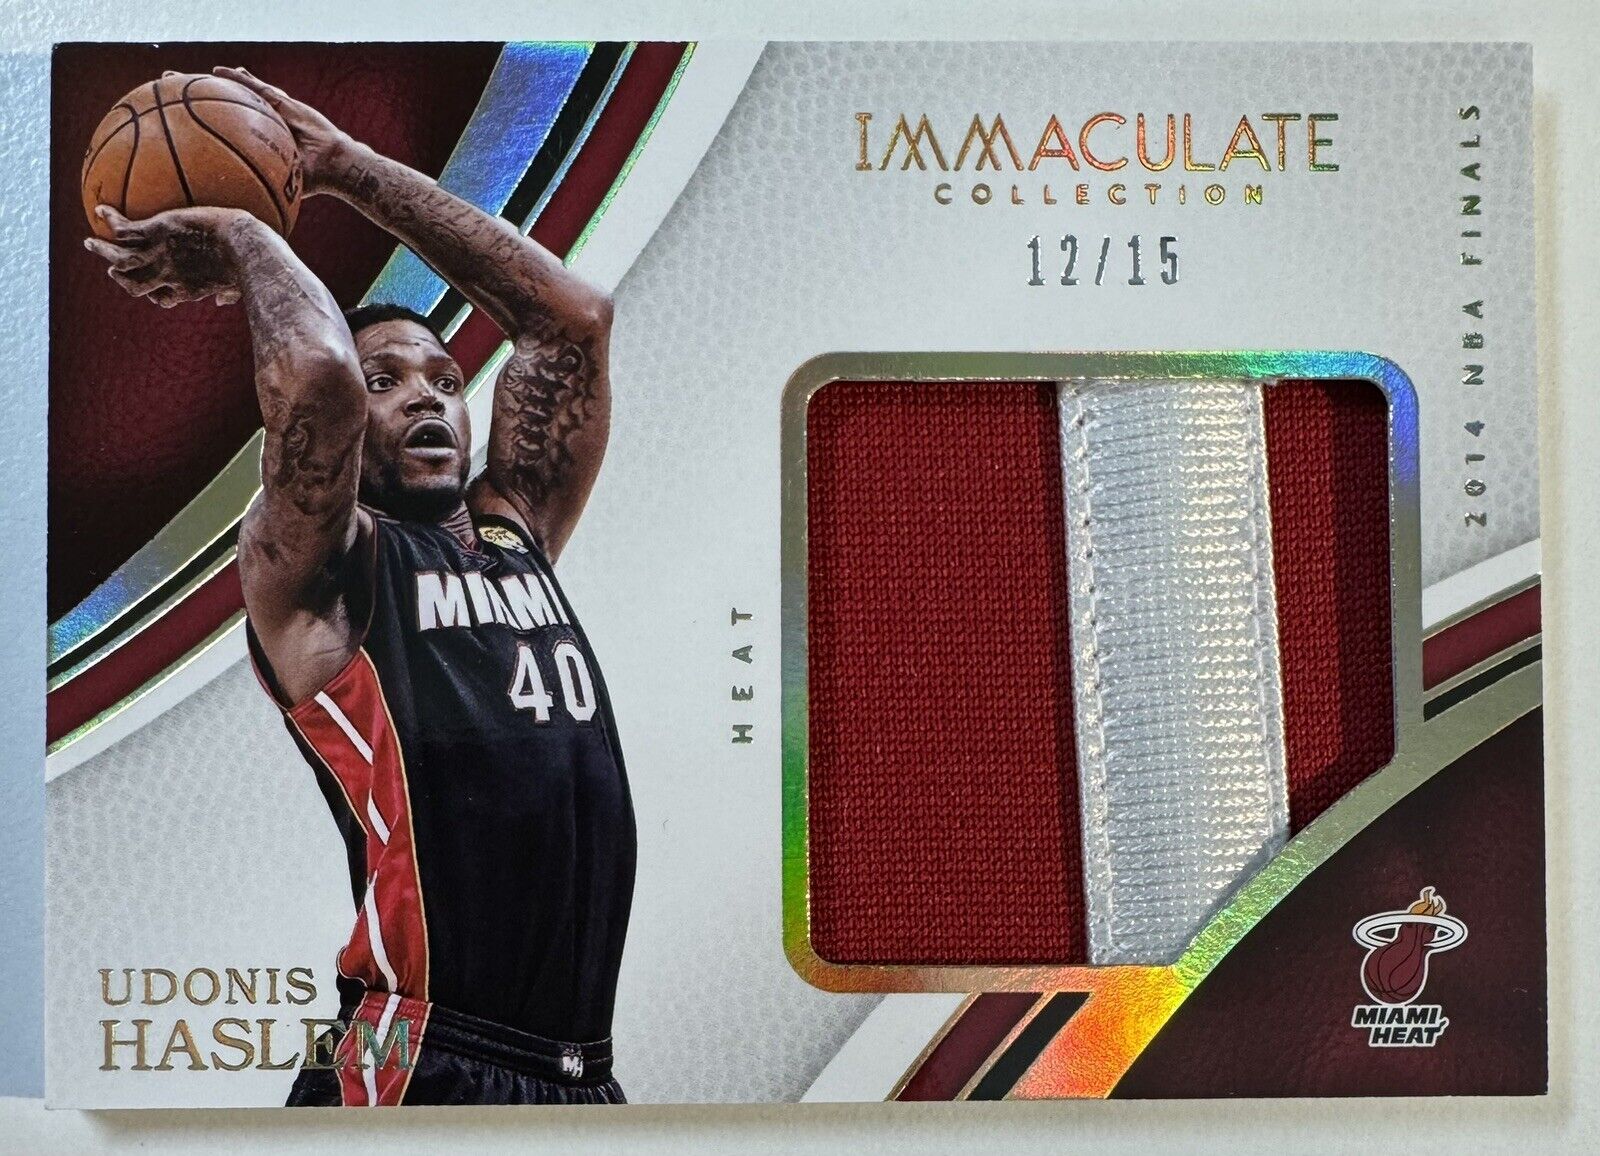 2016-17 Panini Immaculate Udonis Haslem Special Events Finals Prime Patch #/15